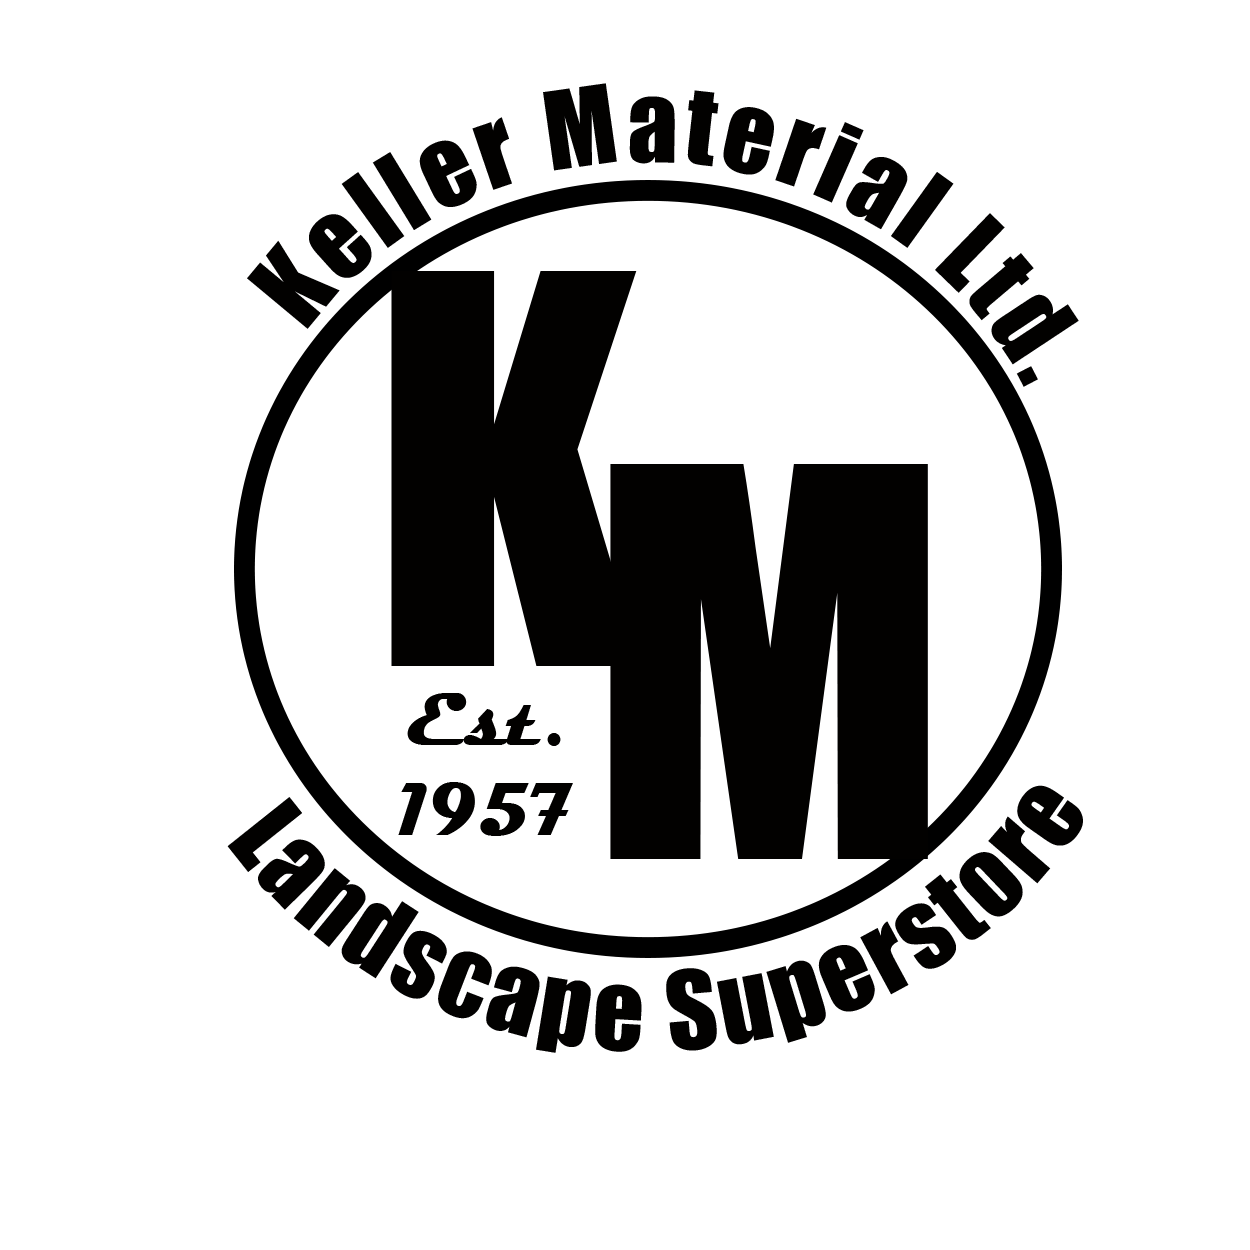 Company logo of Keller Material, Ltd. - Stone and Landscape Superstore